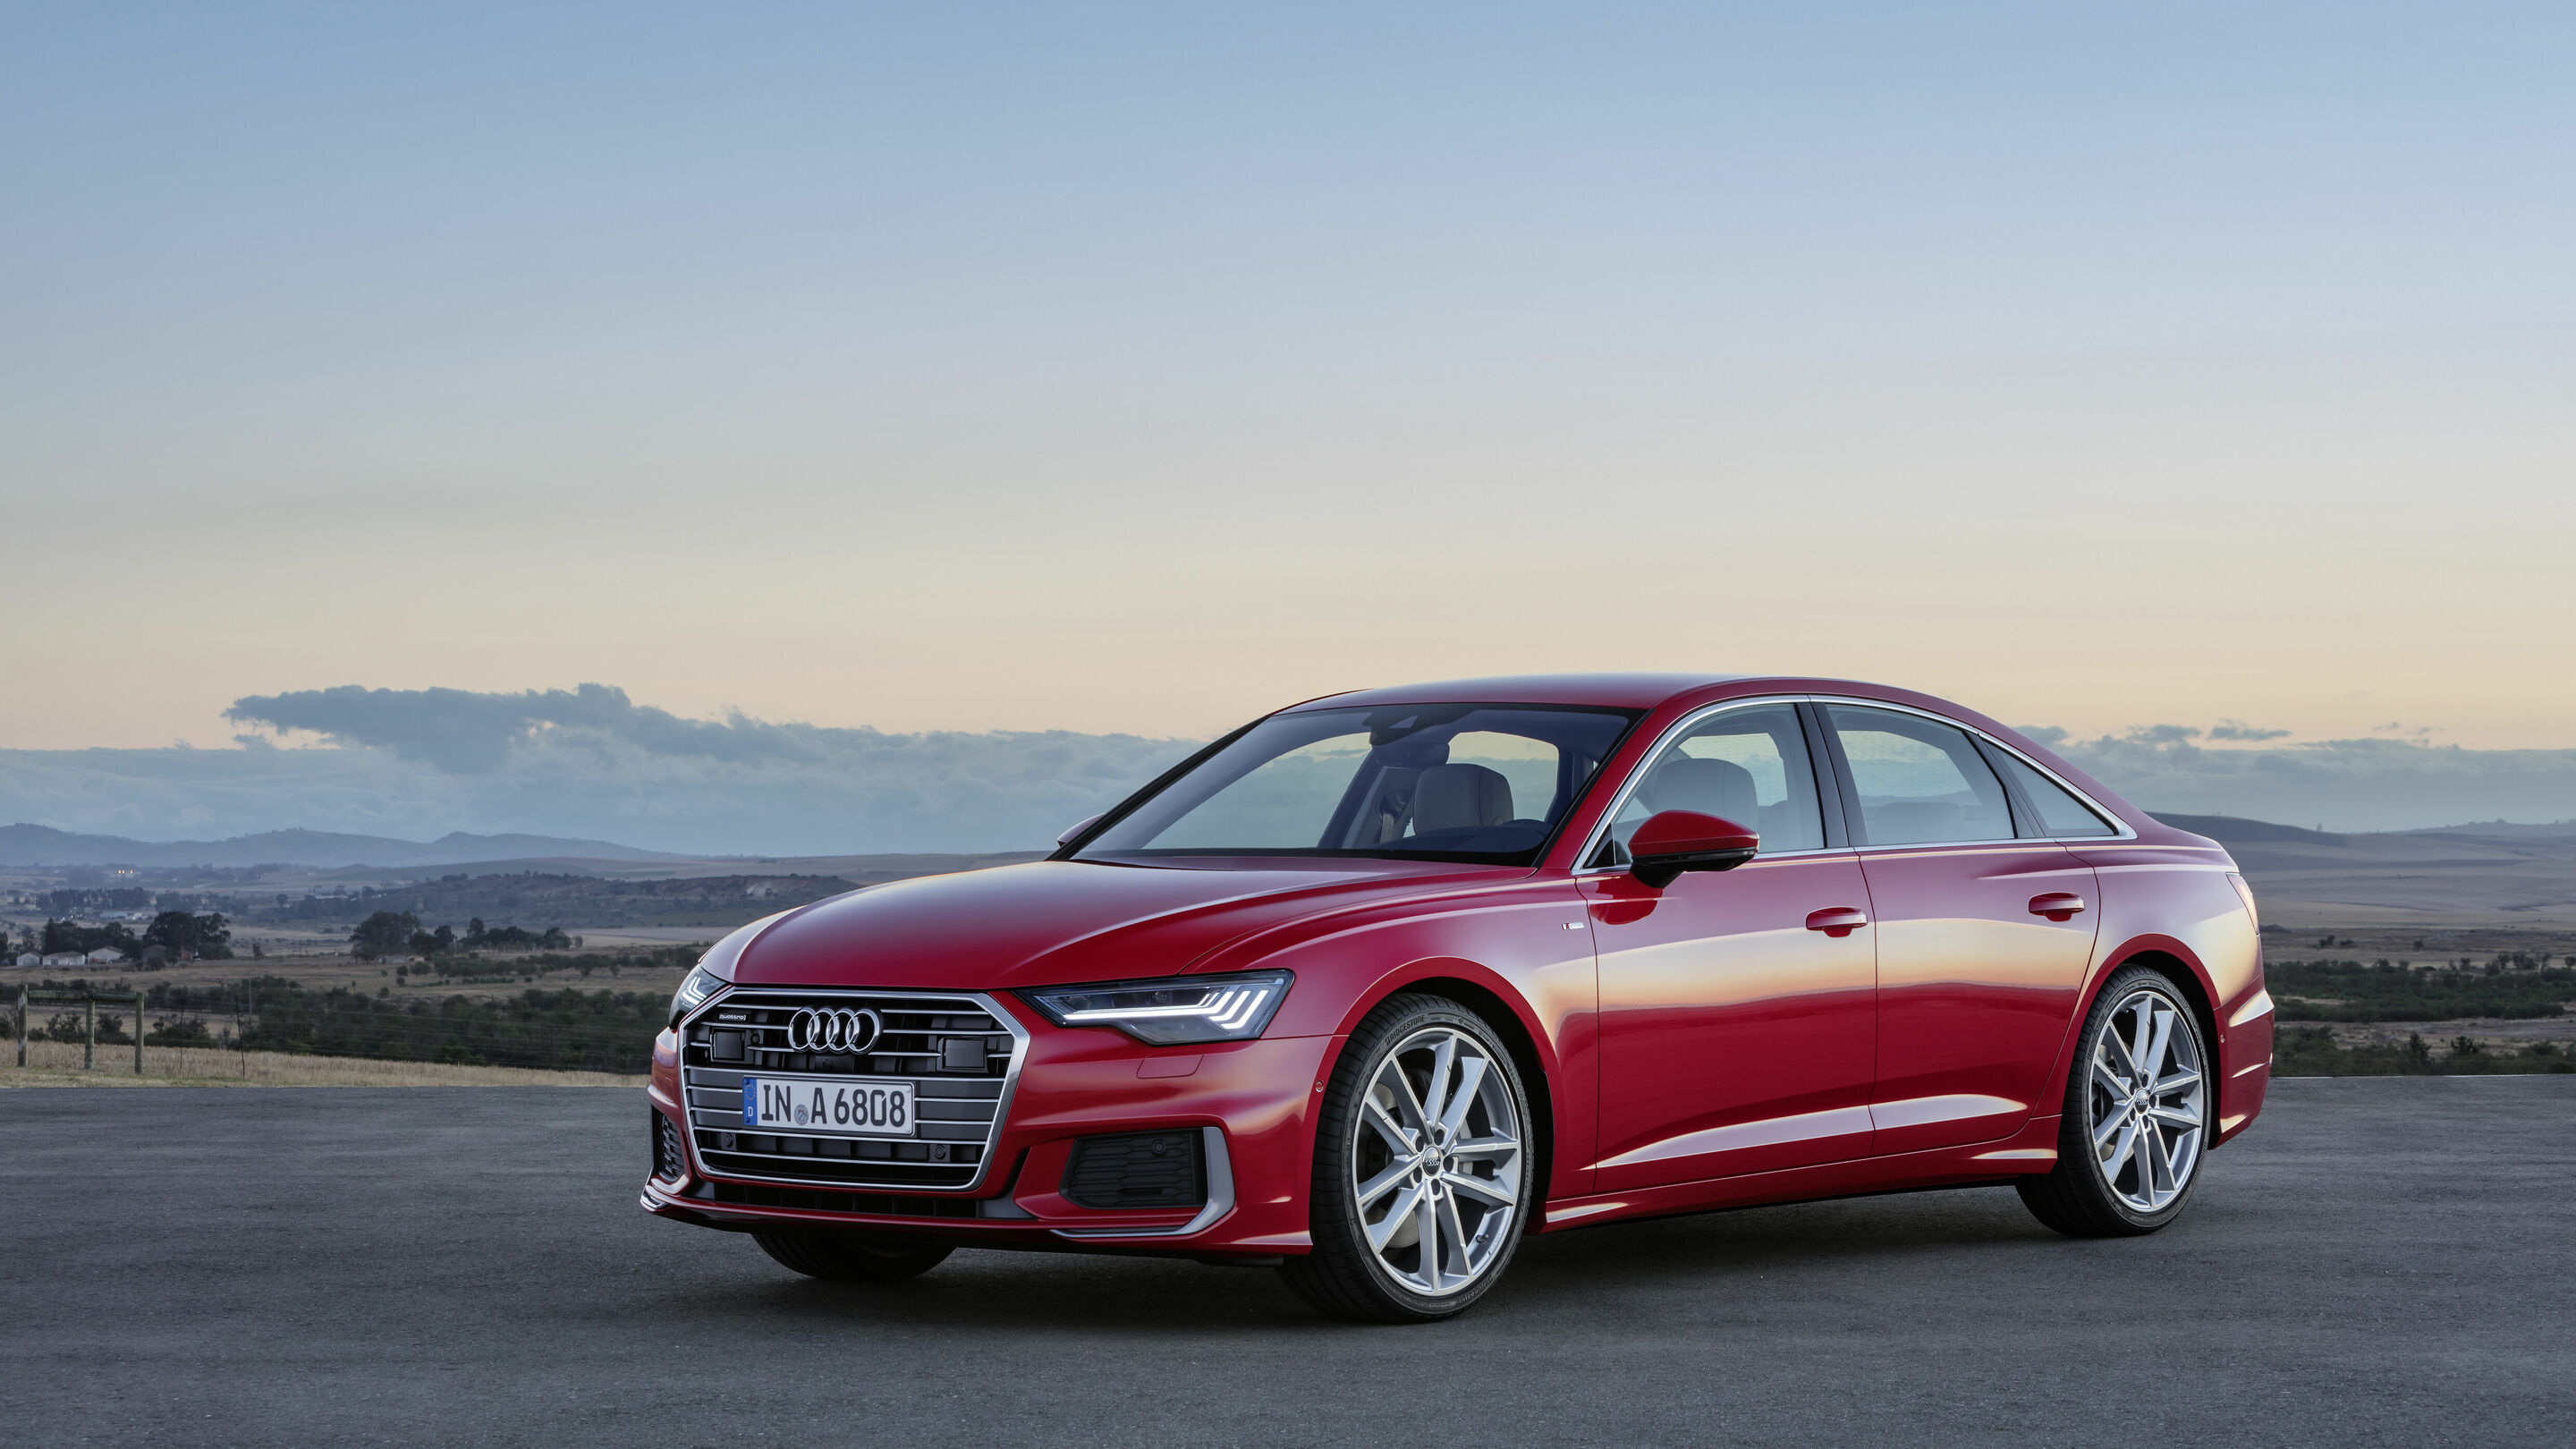 Upgrade in the business class: the new Audi A6 Sedan